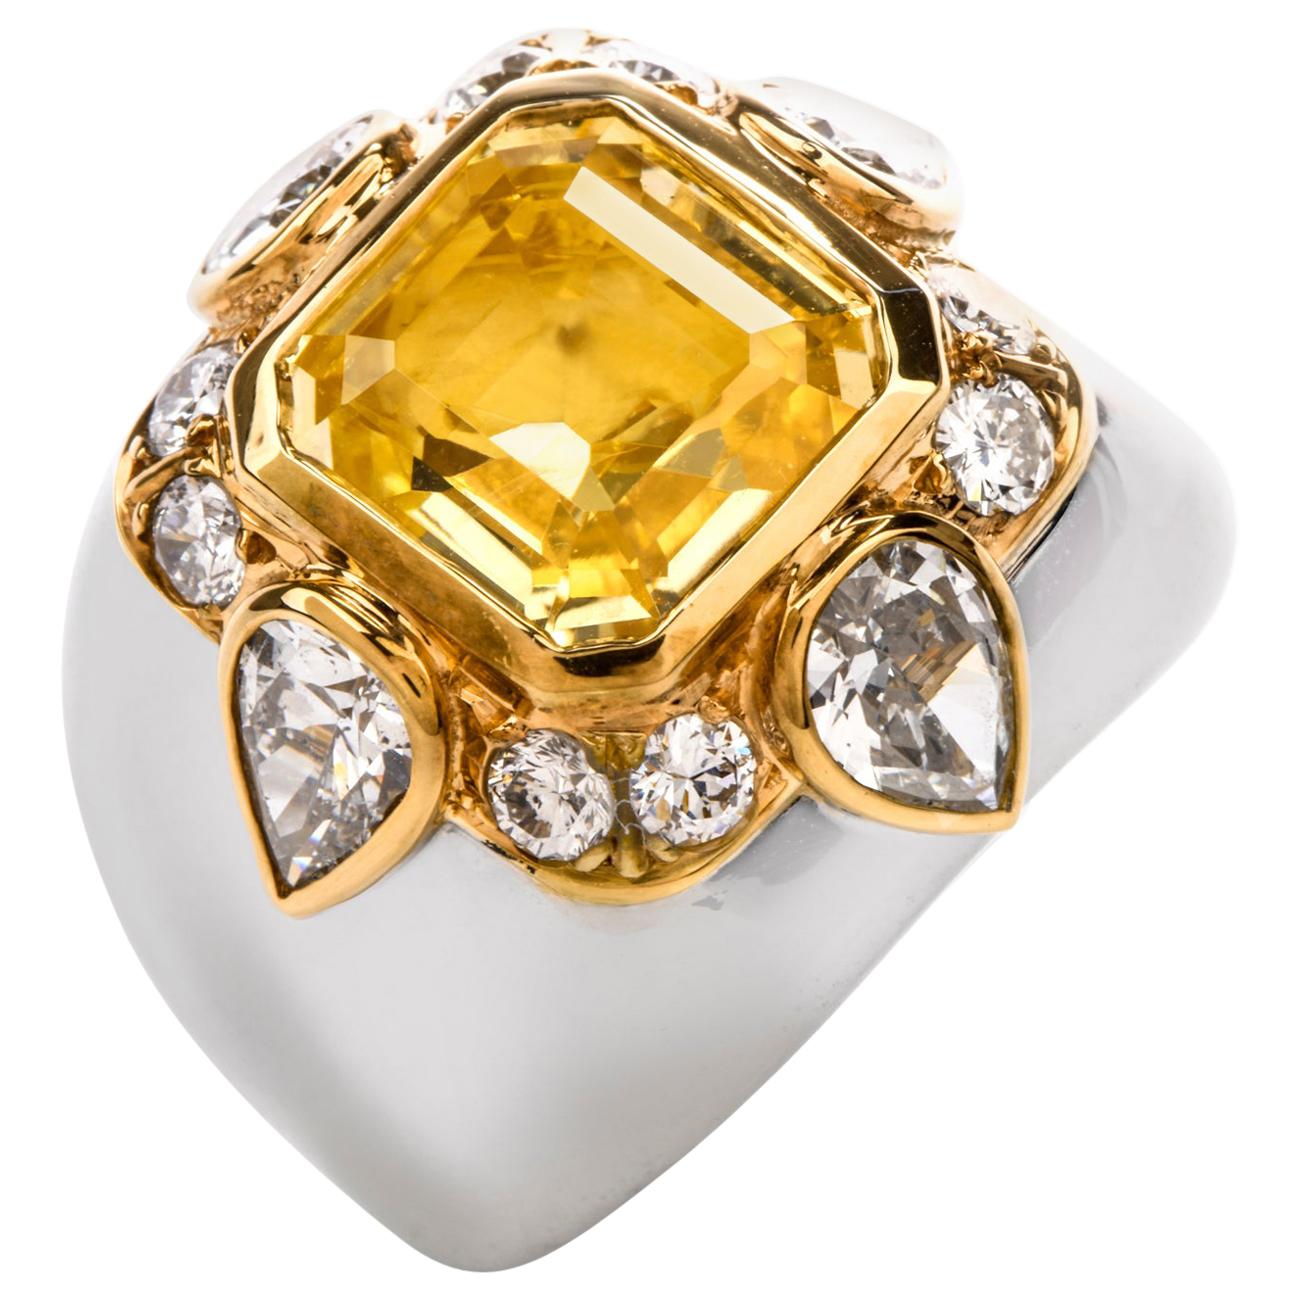 
This Pristine condition Diamond and  Yellow Sapphire cocktail Ring was inspired in a Dome motif and crafted in14K white Gold.
Adorning the center is a square emerald cut Natural Untreated Yellow Sapphire from Sri Luanka (Ceylon), 
measuring 10.57 x